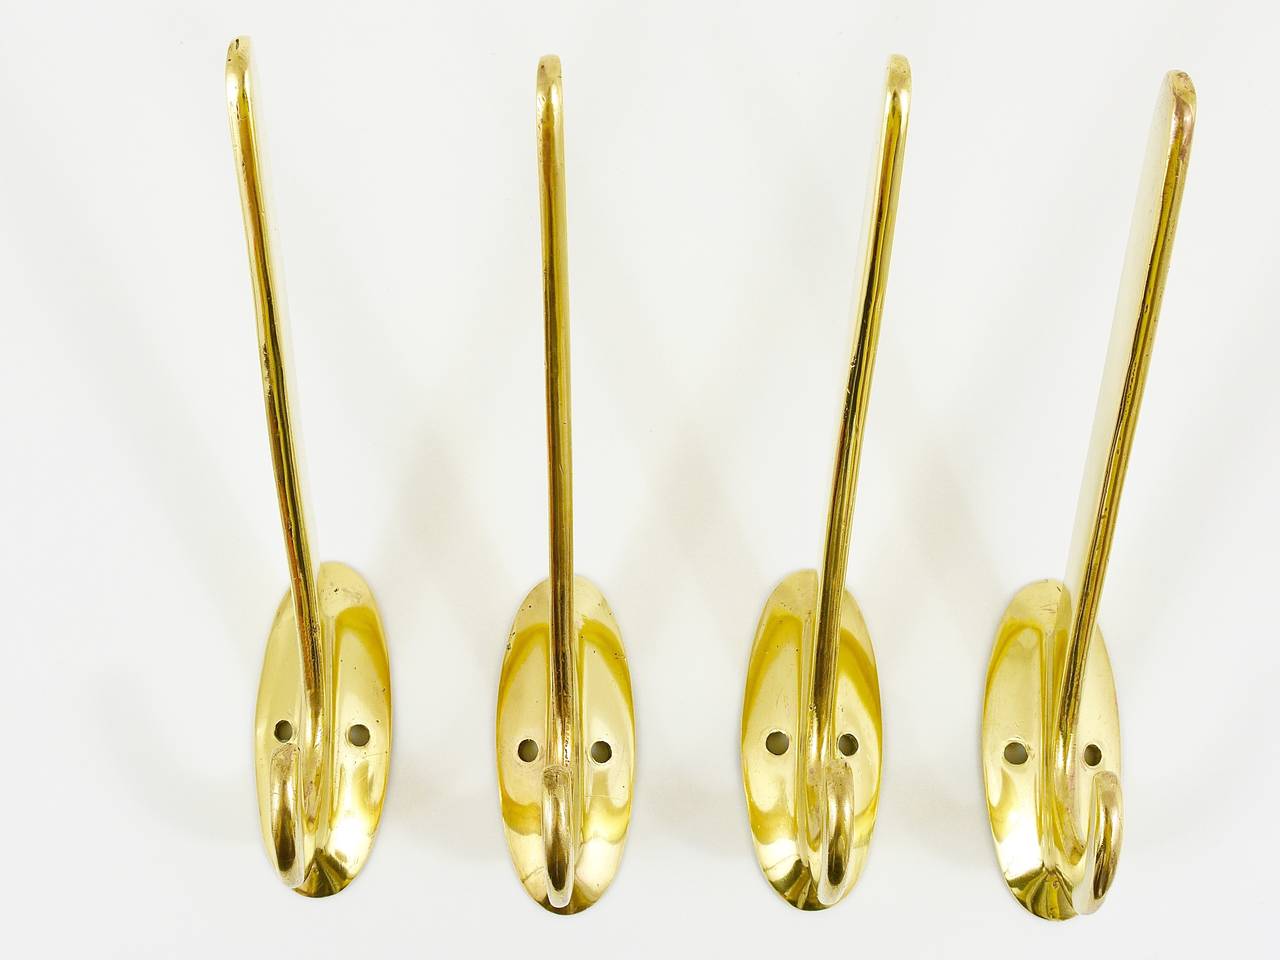 Four Art Nouveau Handmade Brass Wall Hooks, Austria, 1920s In Good Condition For Sale In Vienna, AT